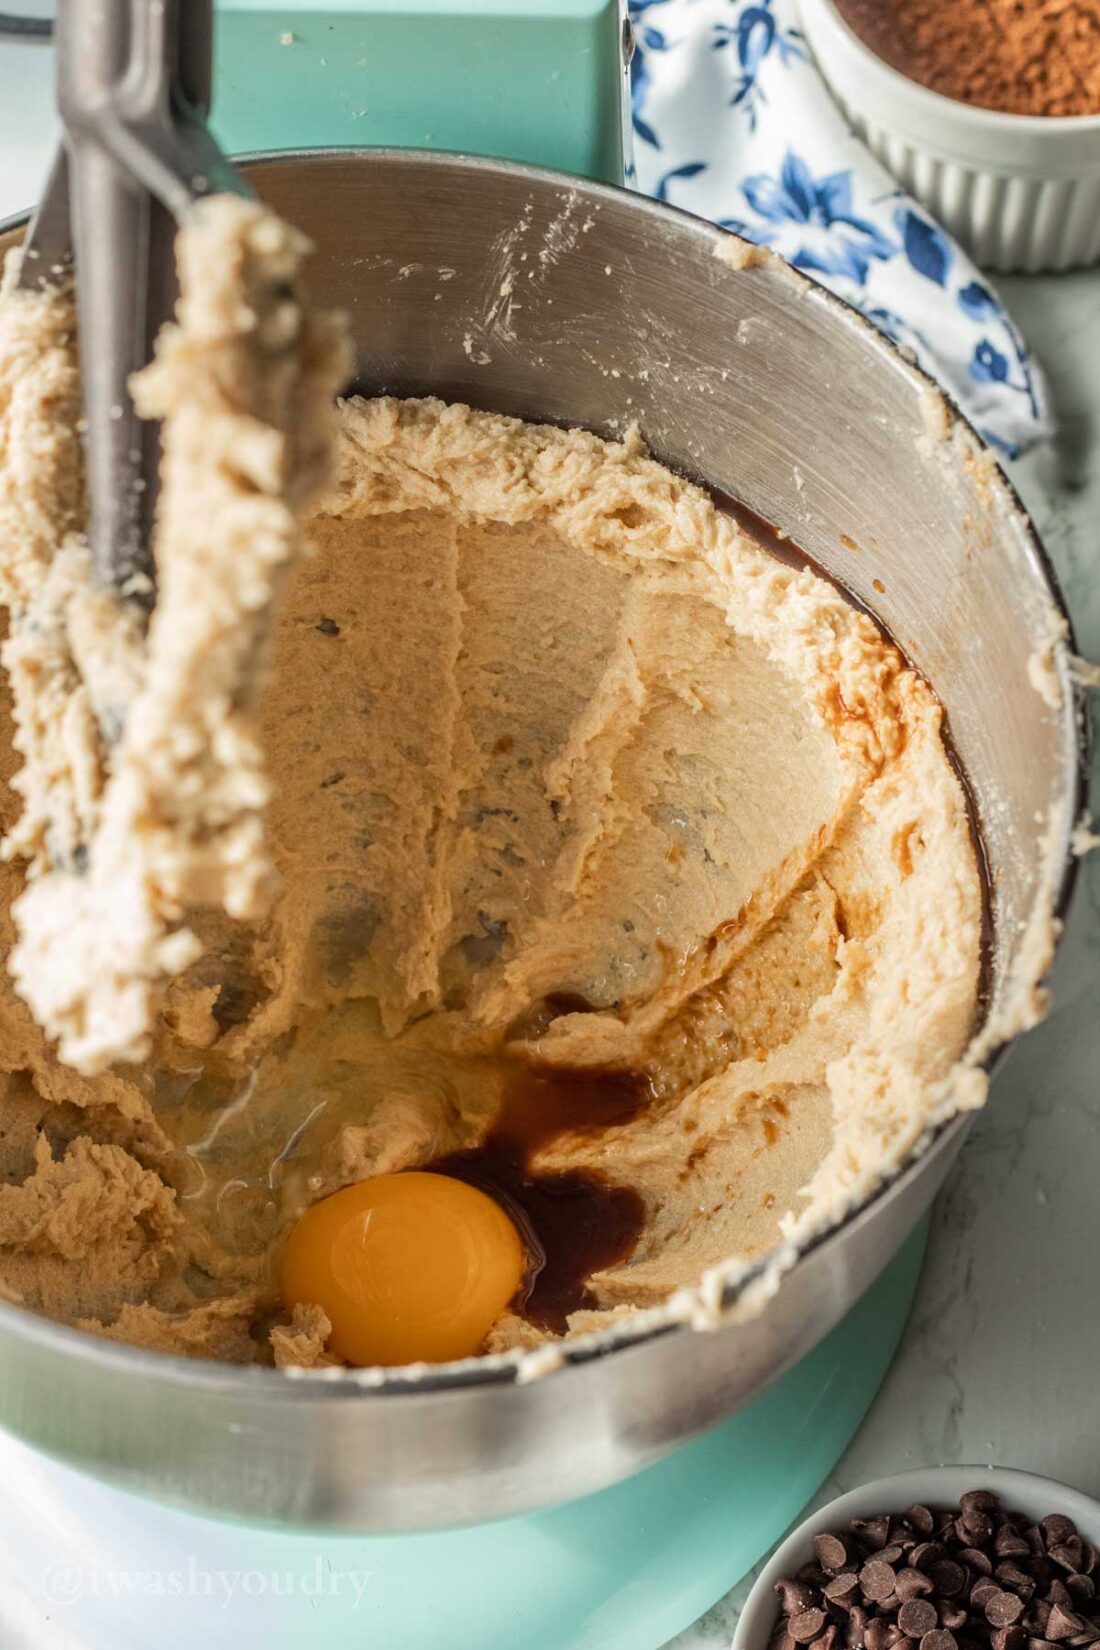 Egg in mixing bowl with butter, brown sugar, and vanilla extract.